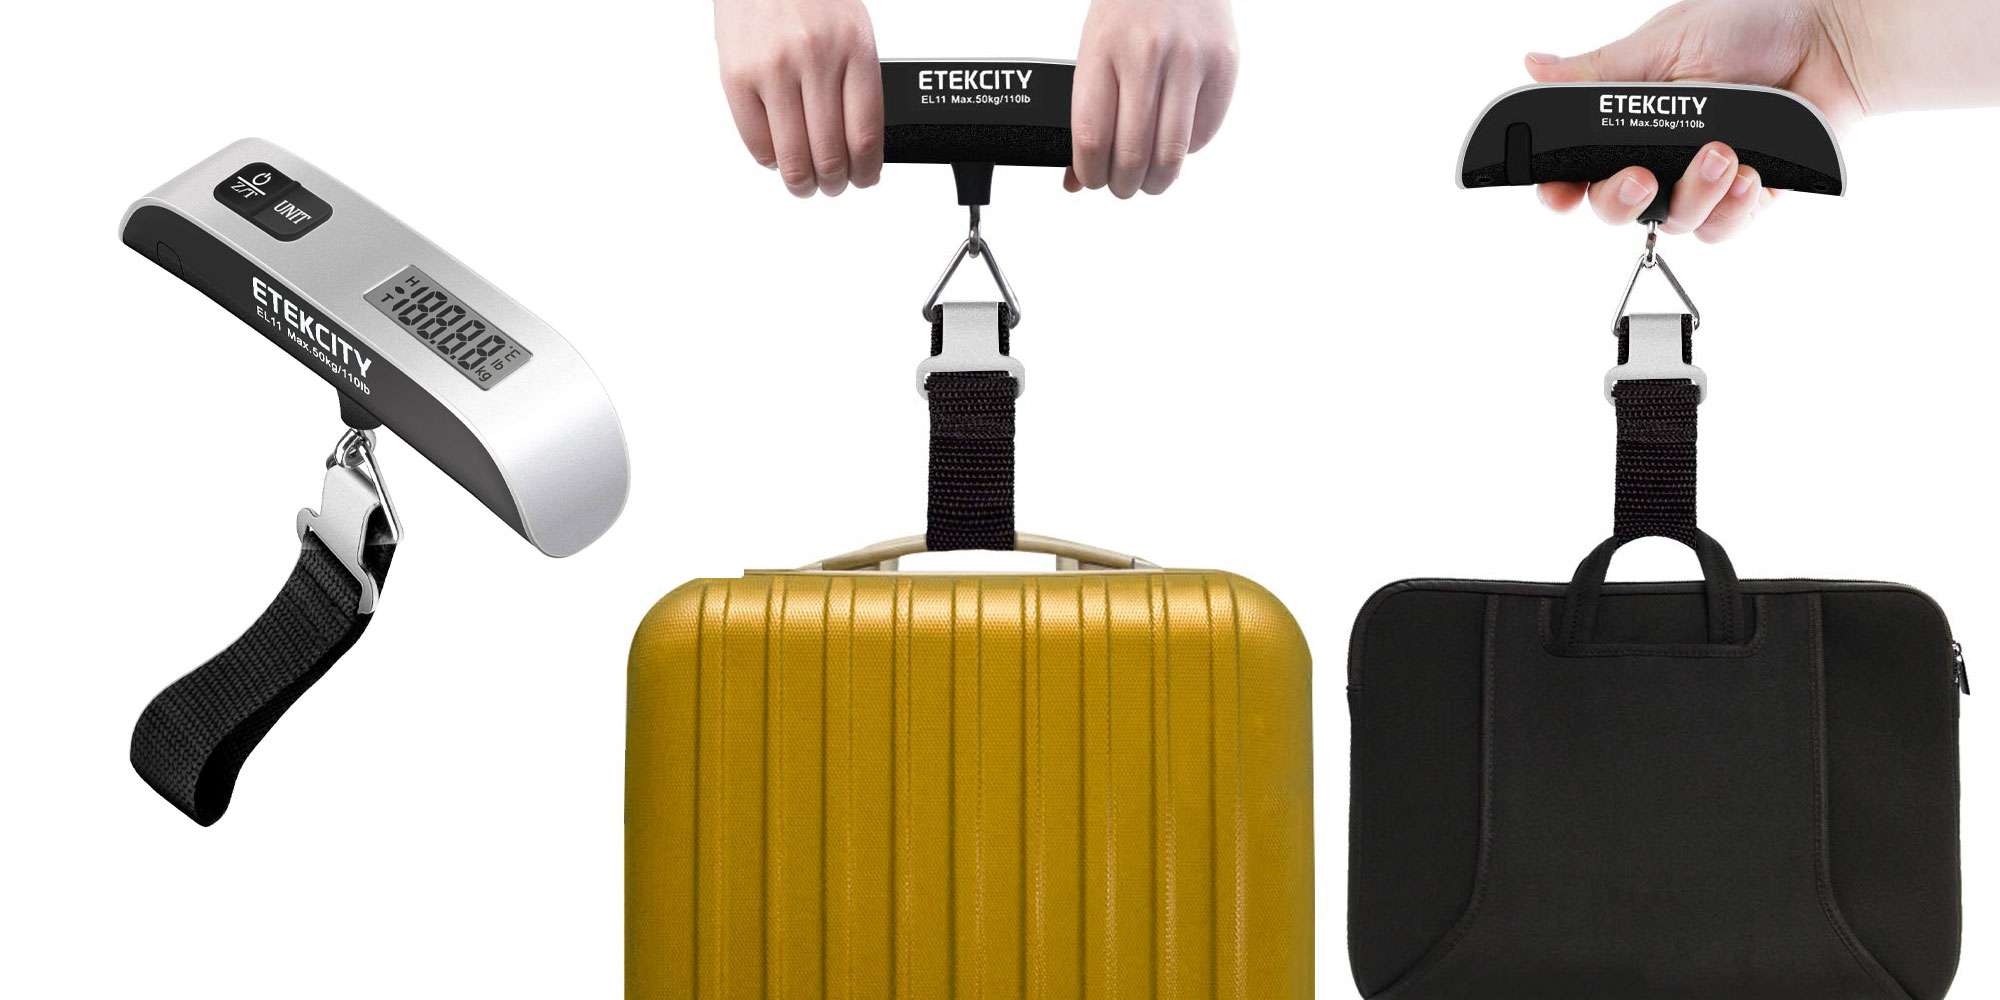 Save nearly 50% on this 2-pack of must-have digital luggage scales